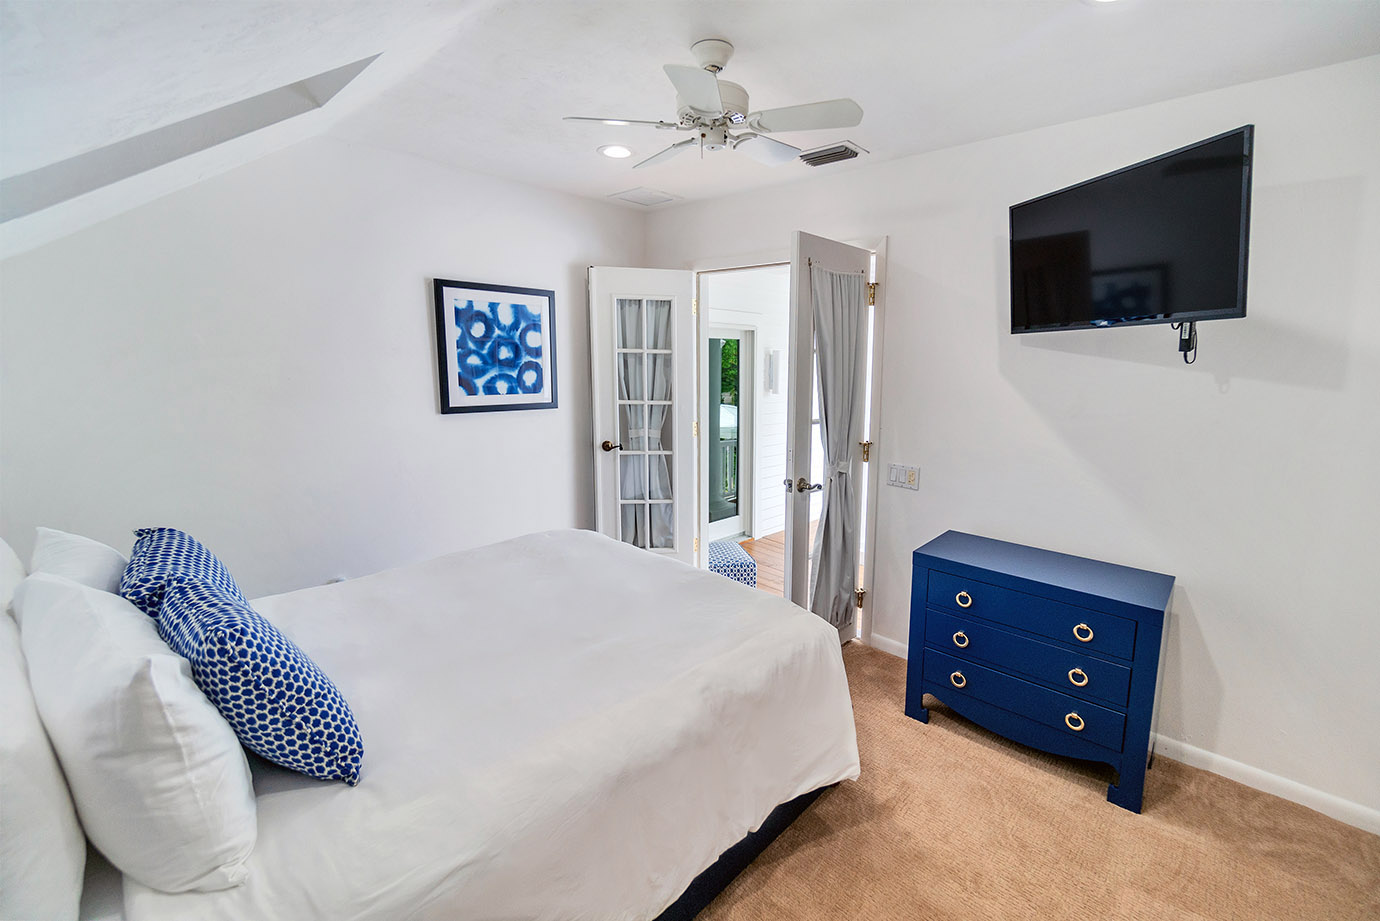 Bedroom in the Captiva Island, FL Sea Oats Estate with a bed with white bedding and pillows, two decorative navy and white pillows, a blue dresser with gold handles, a tv on the wall and french doors leading to the patio